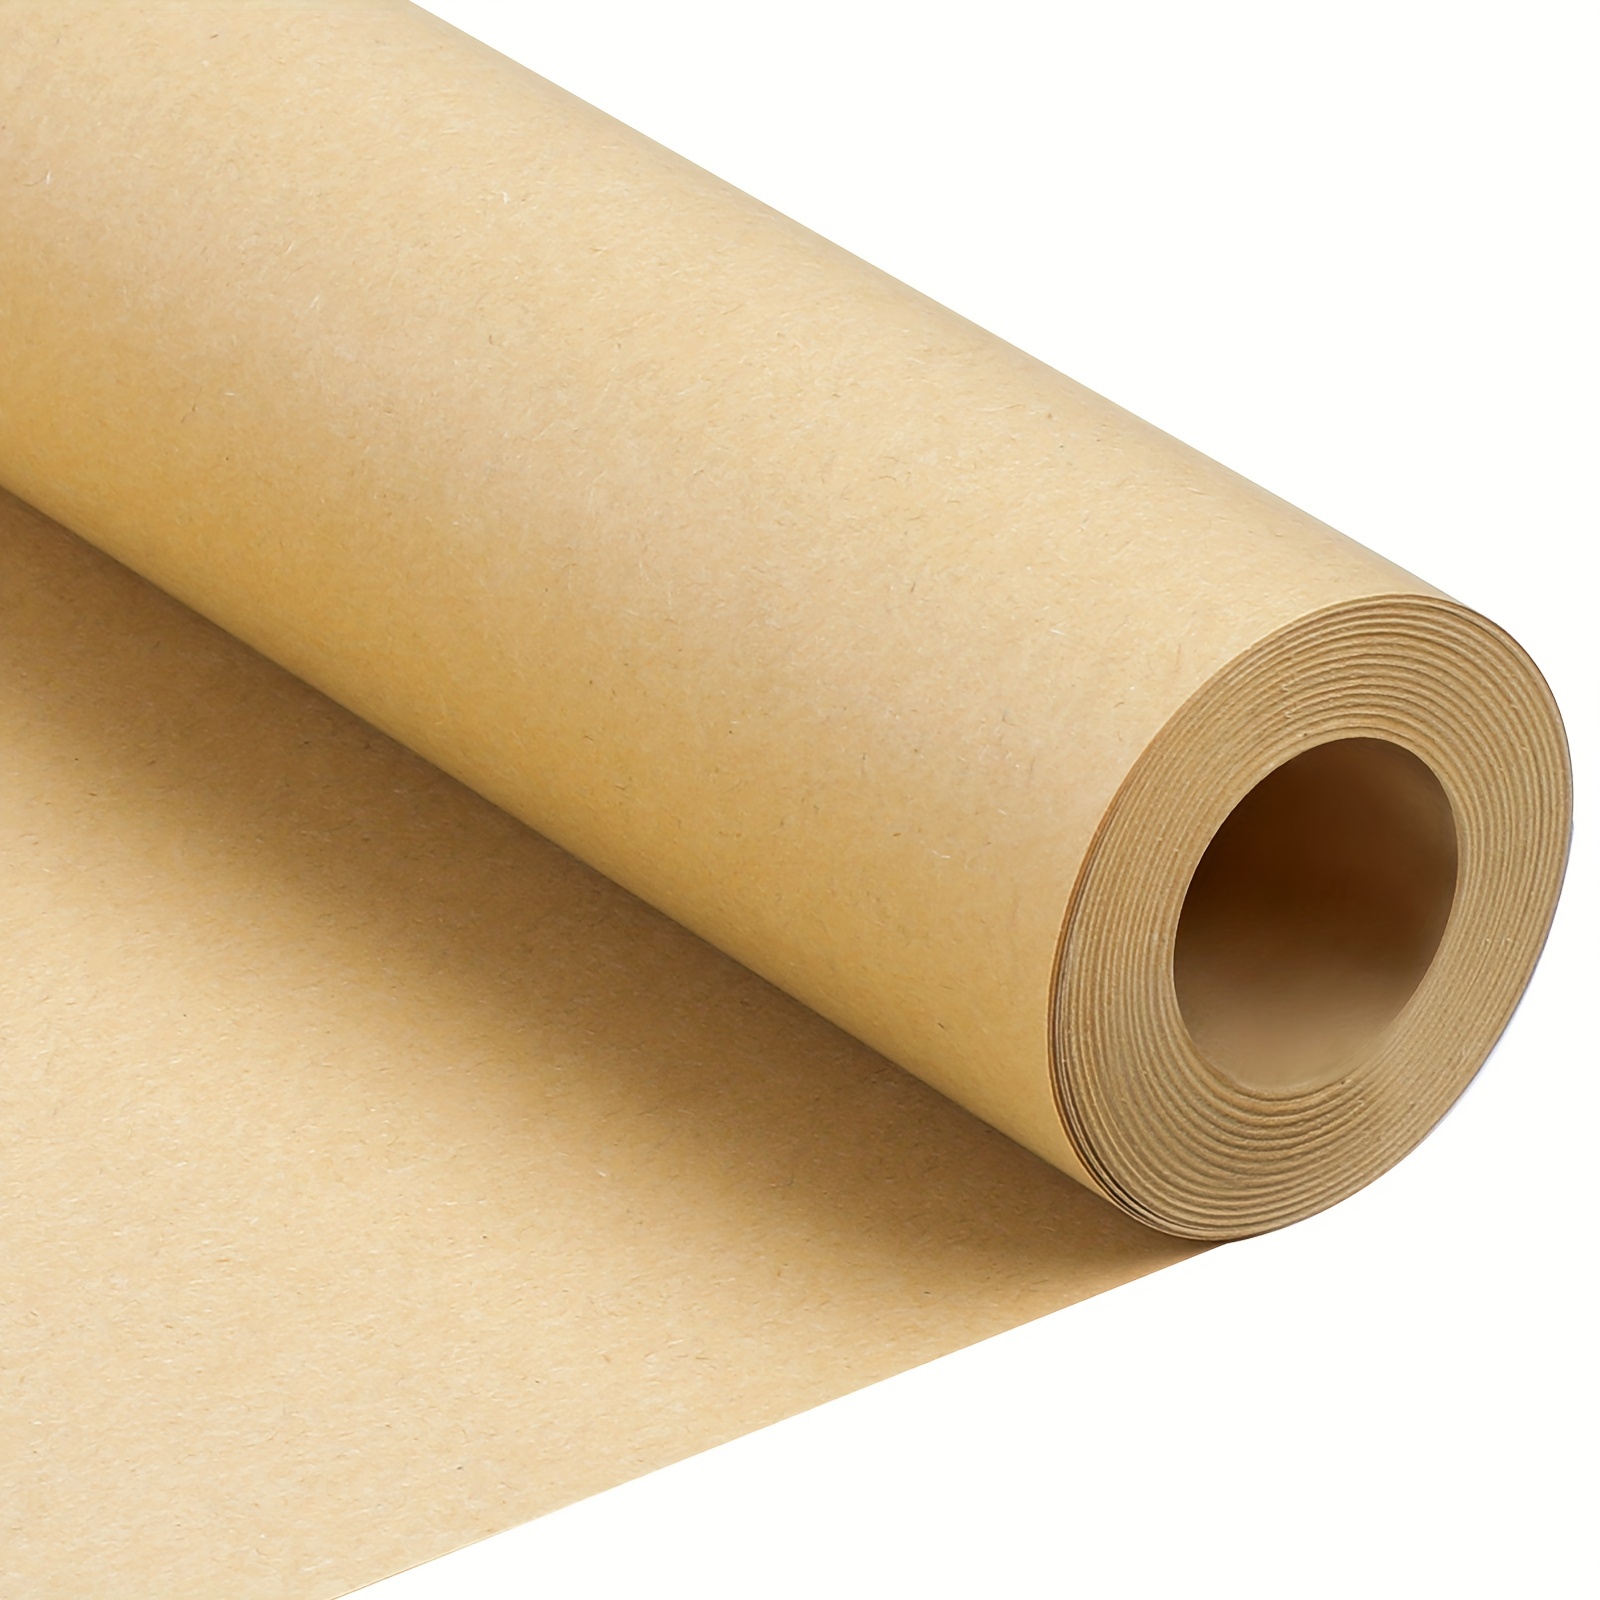 Brown Craft Wrapping Paper Roll  Gift Wrapping Brown Paper Roll